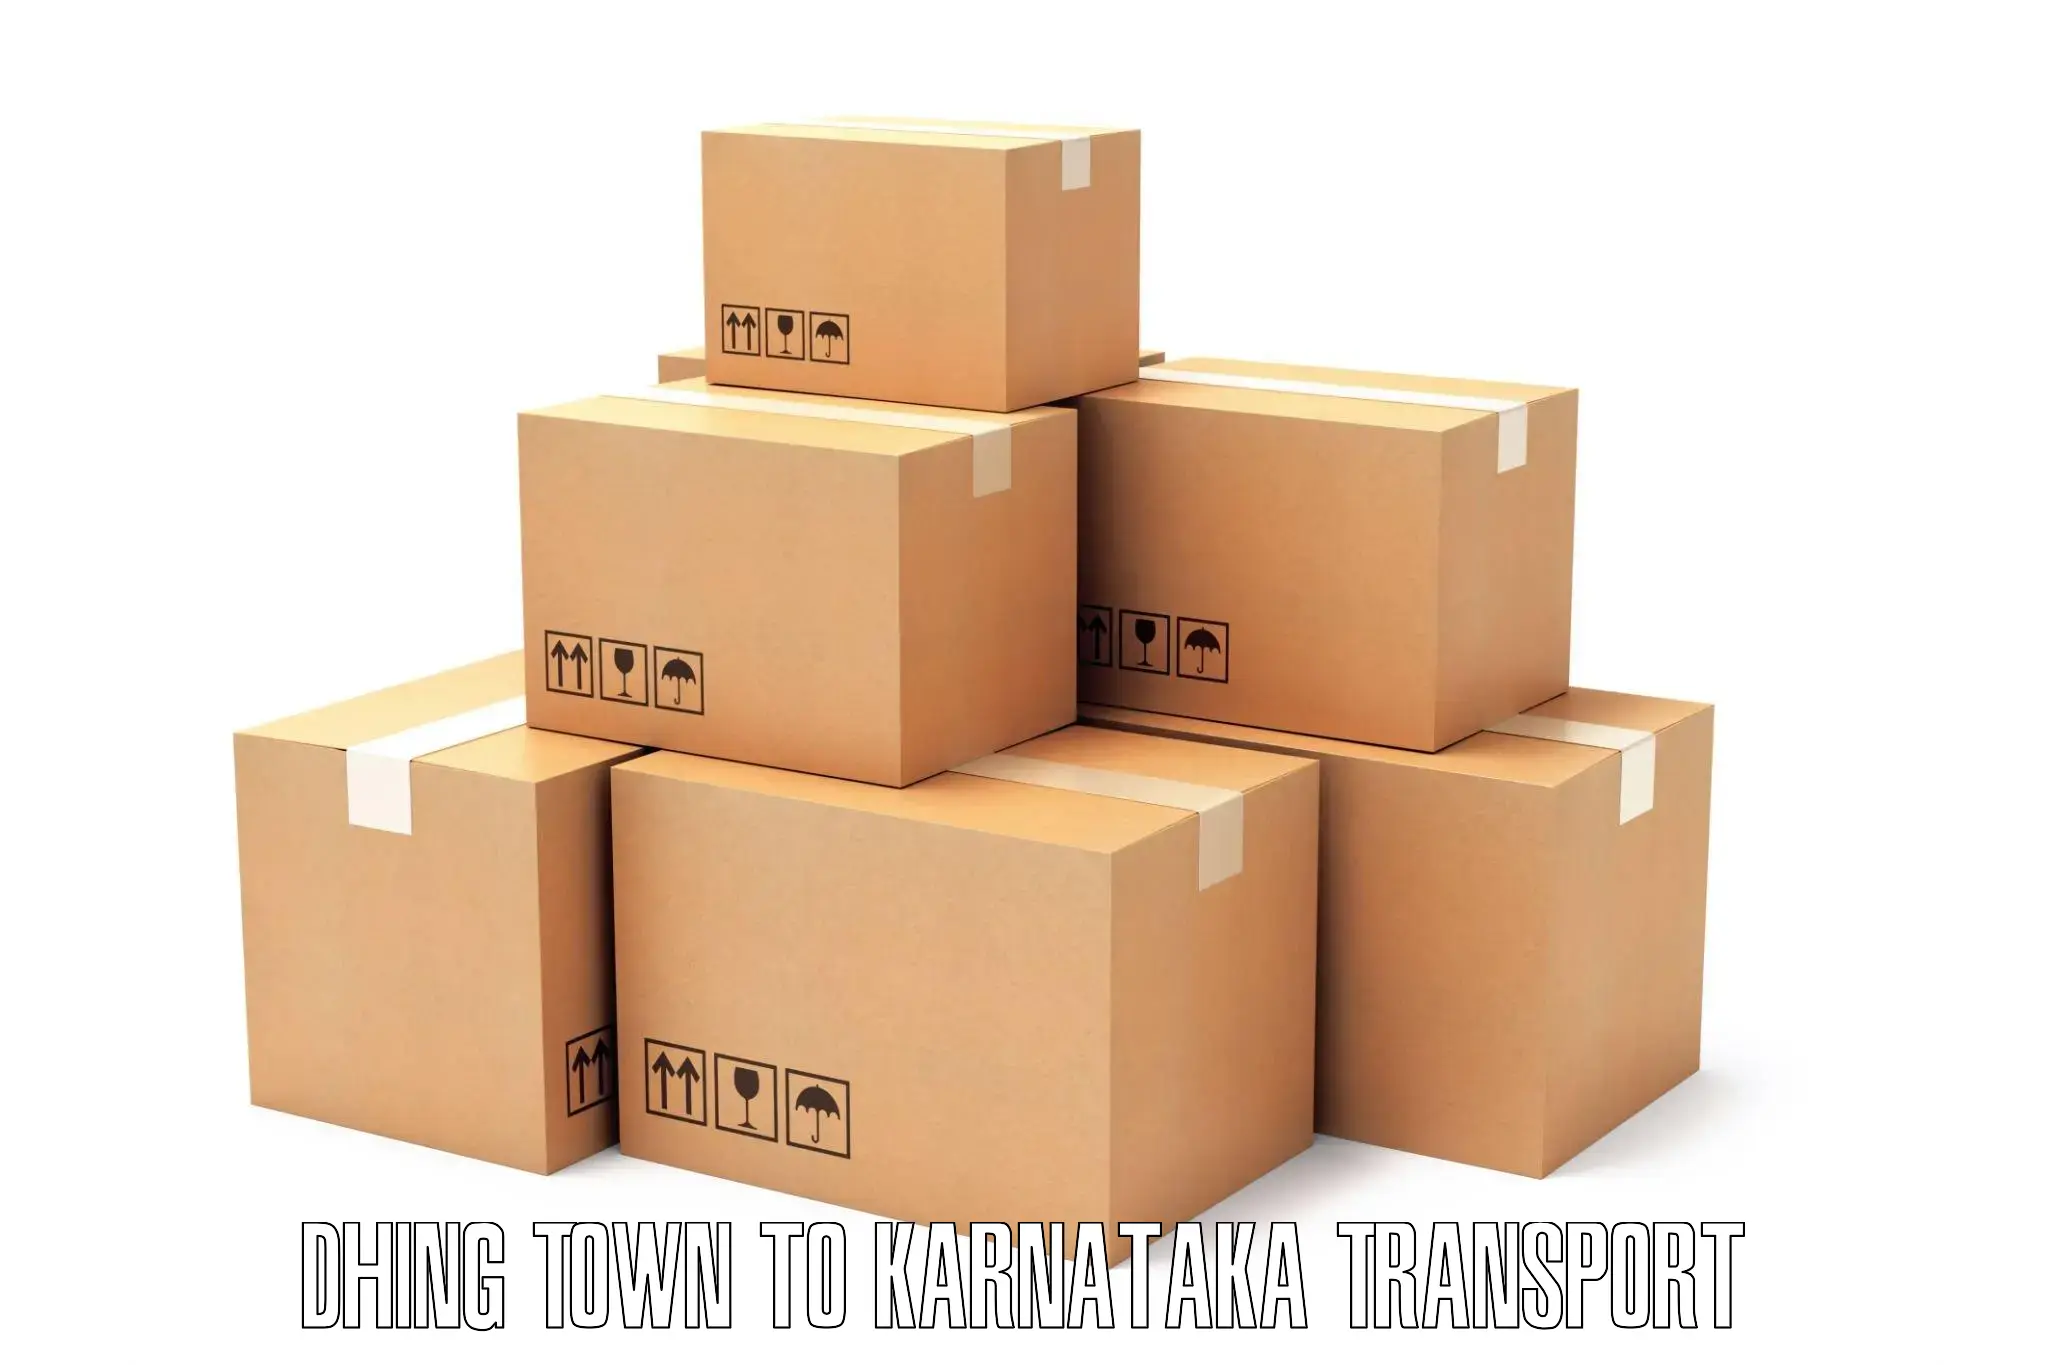 Domestic goods transportation services Dhing Town to Basavanagudi